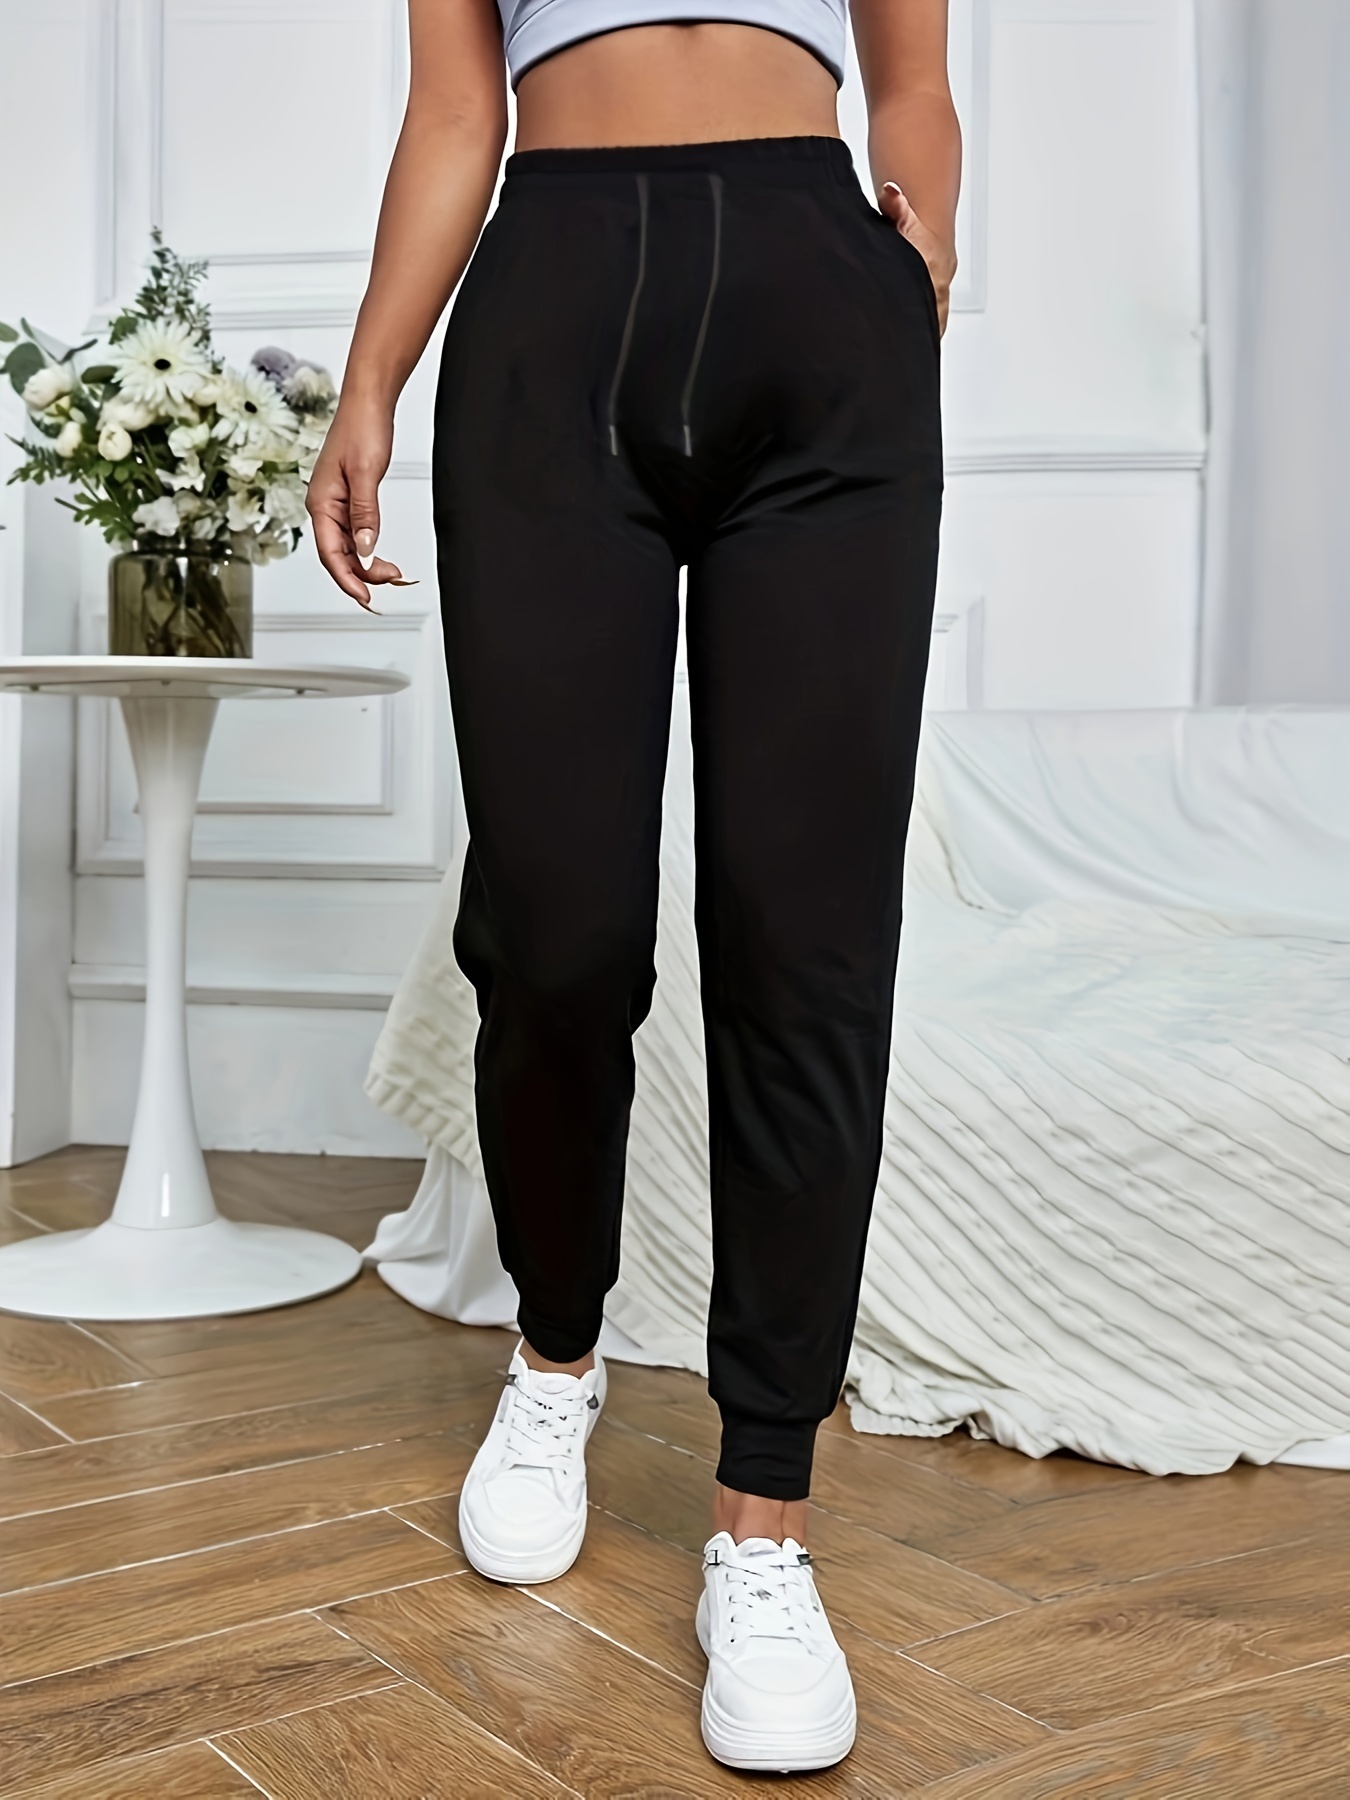 Womens Black Casual Pants - Bottoms, Clothing